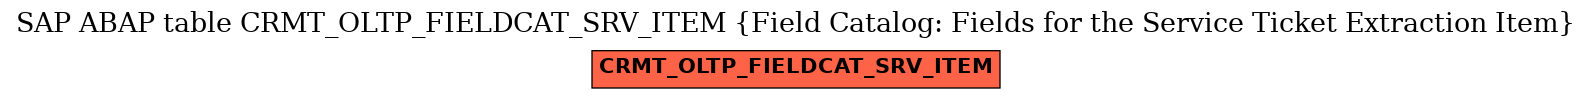 E-R Diagram for table CRMT_OLTP_FIELDCAT_SRV_ITEM (Field Catalog: Fields for the Service Ticket Extraction Item)